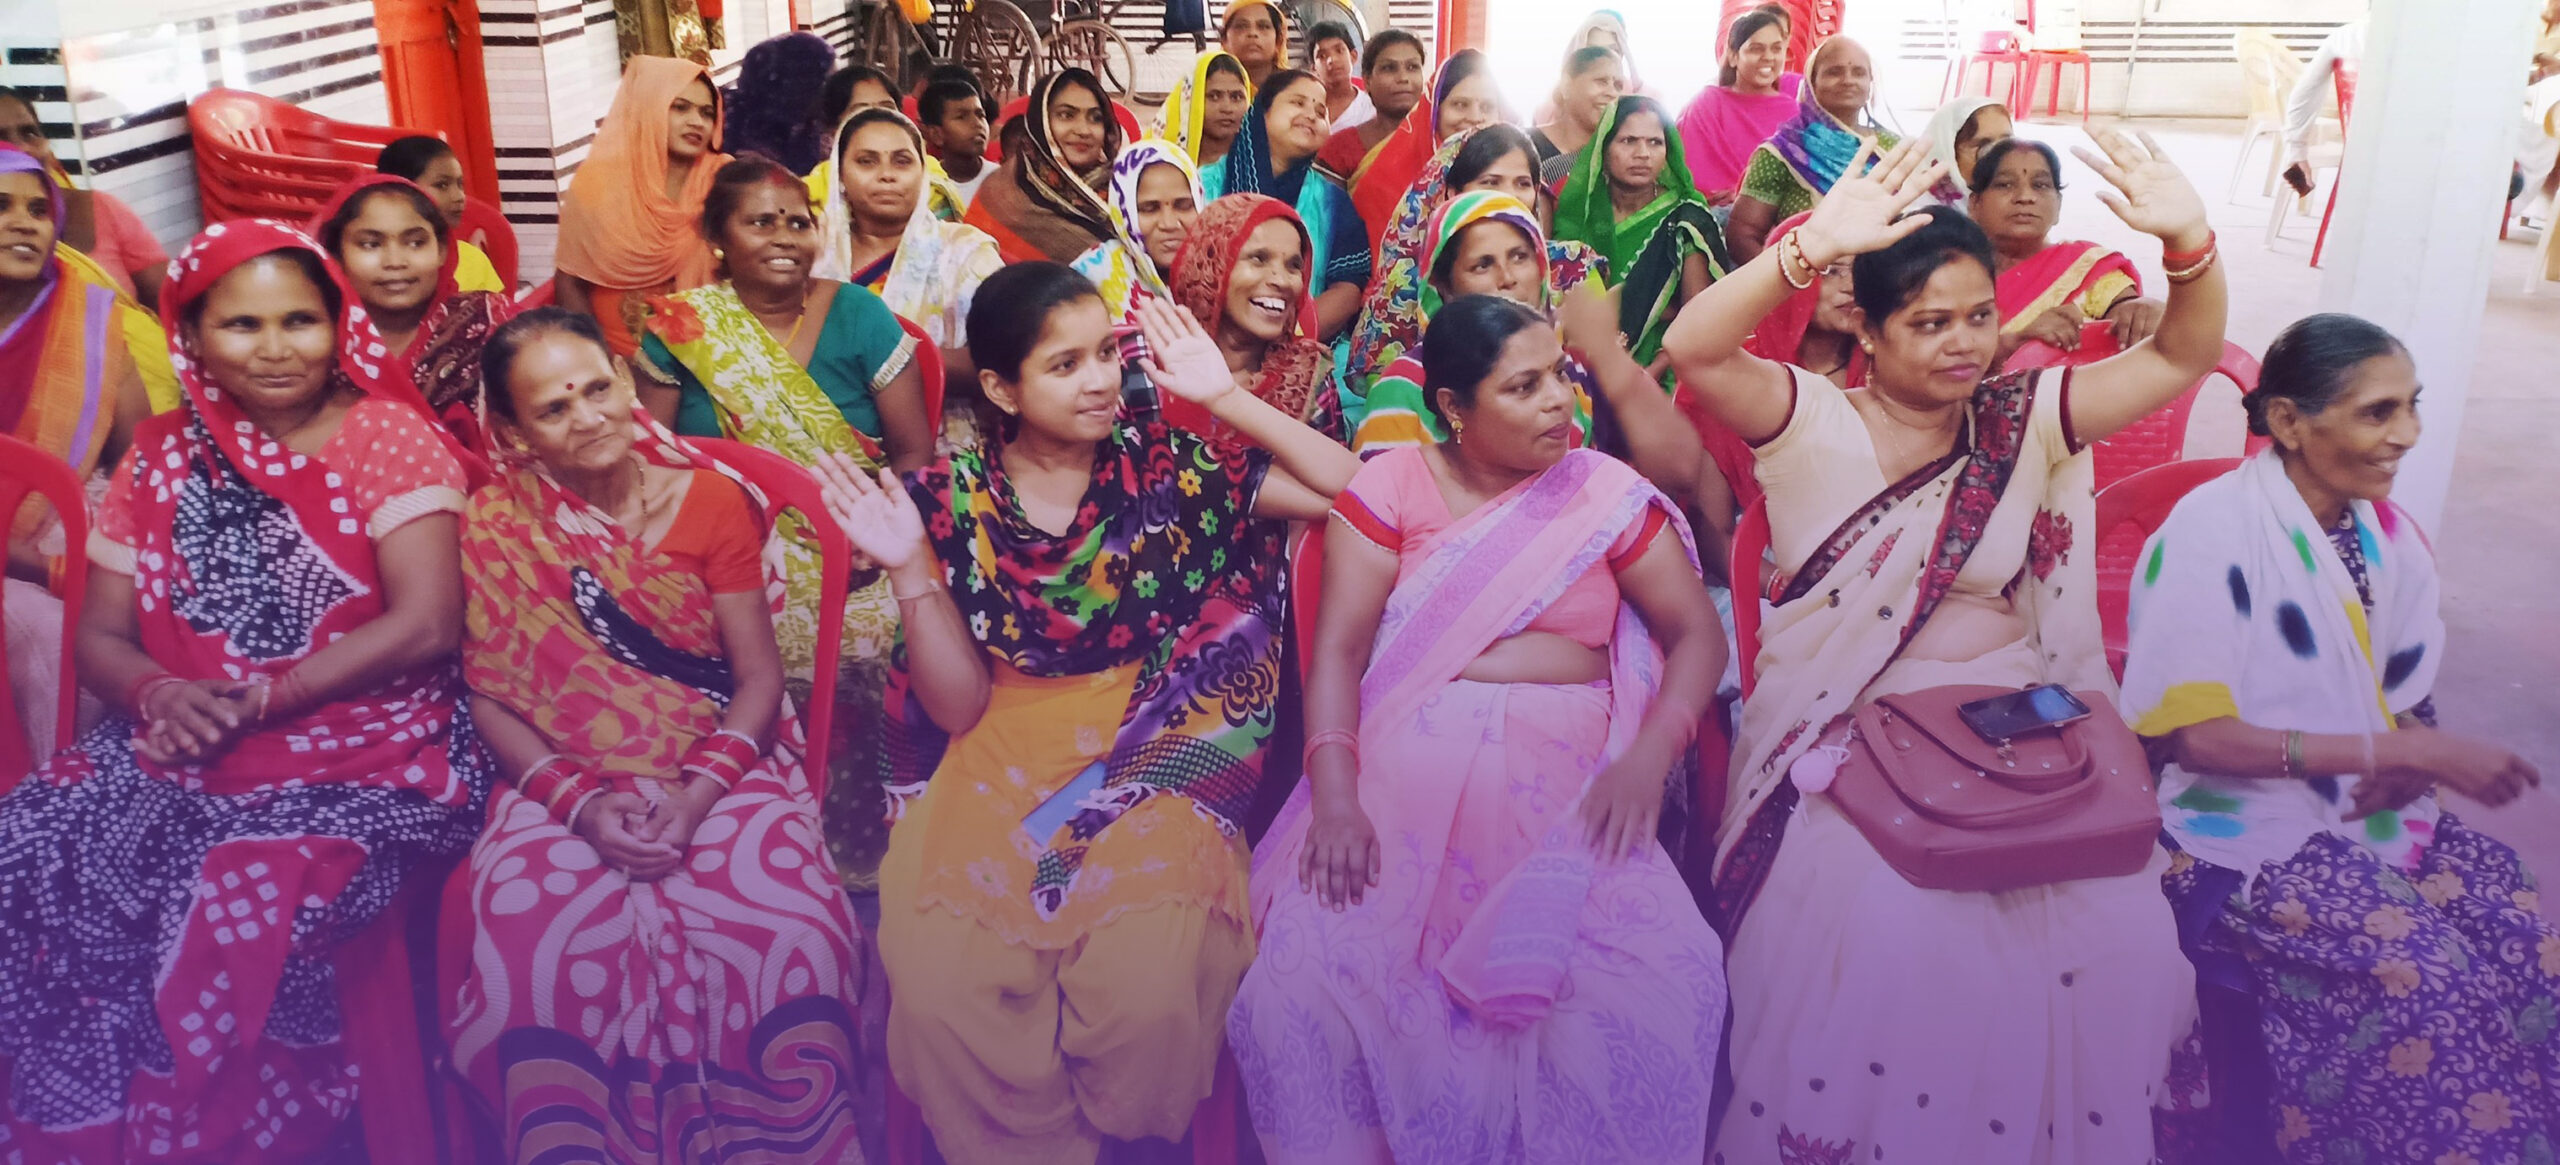 Women confront the State and patriarchal fundamentalism to end violence in India